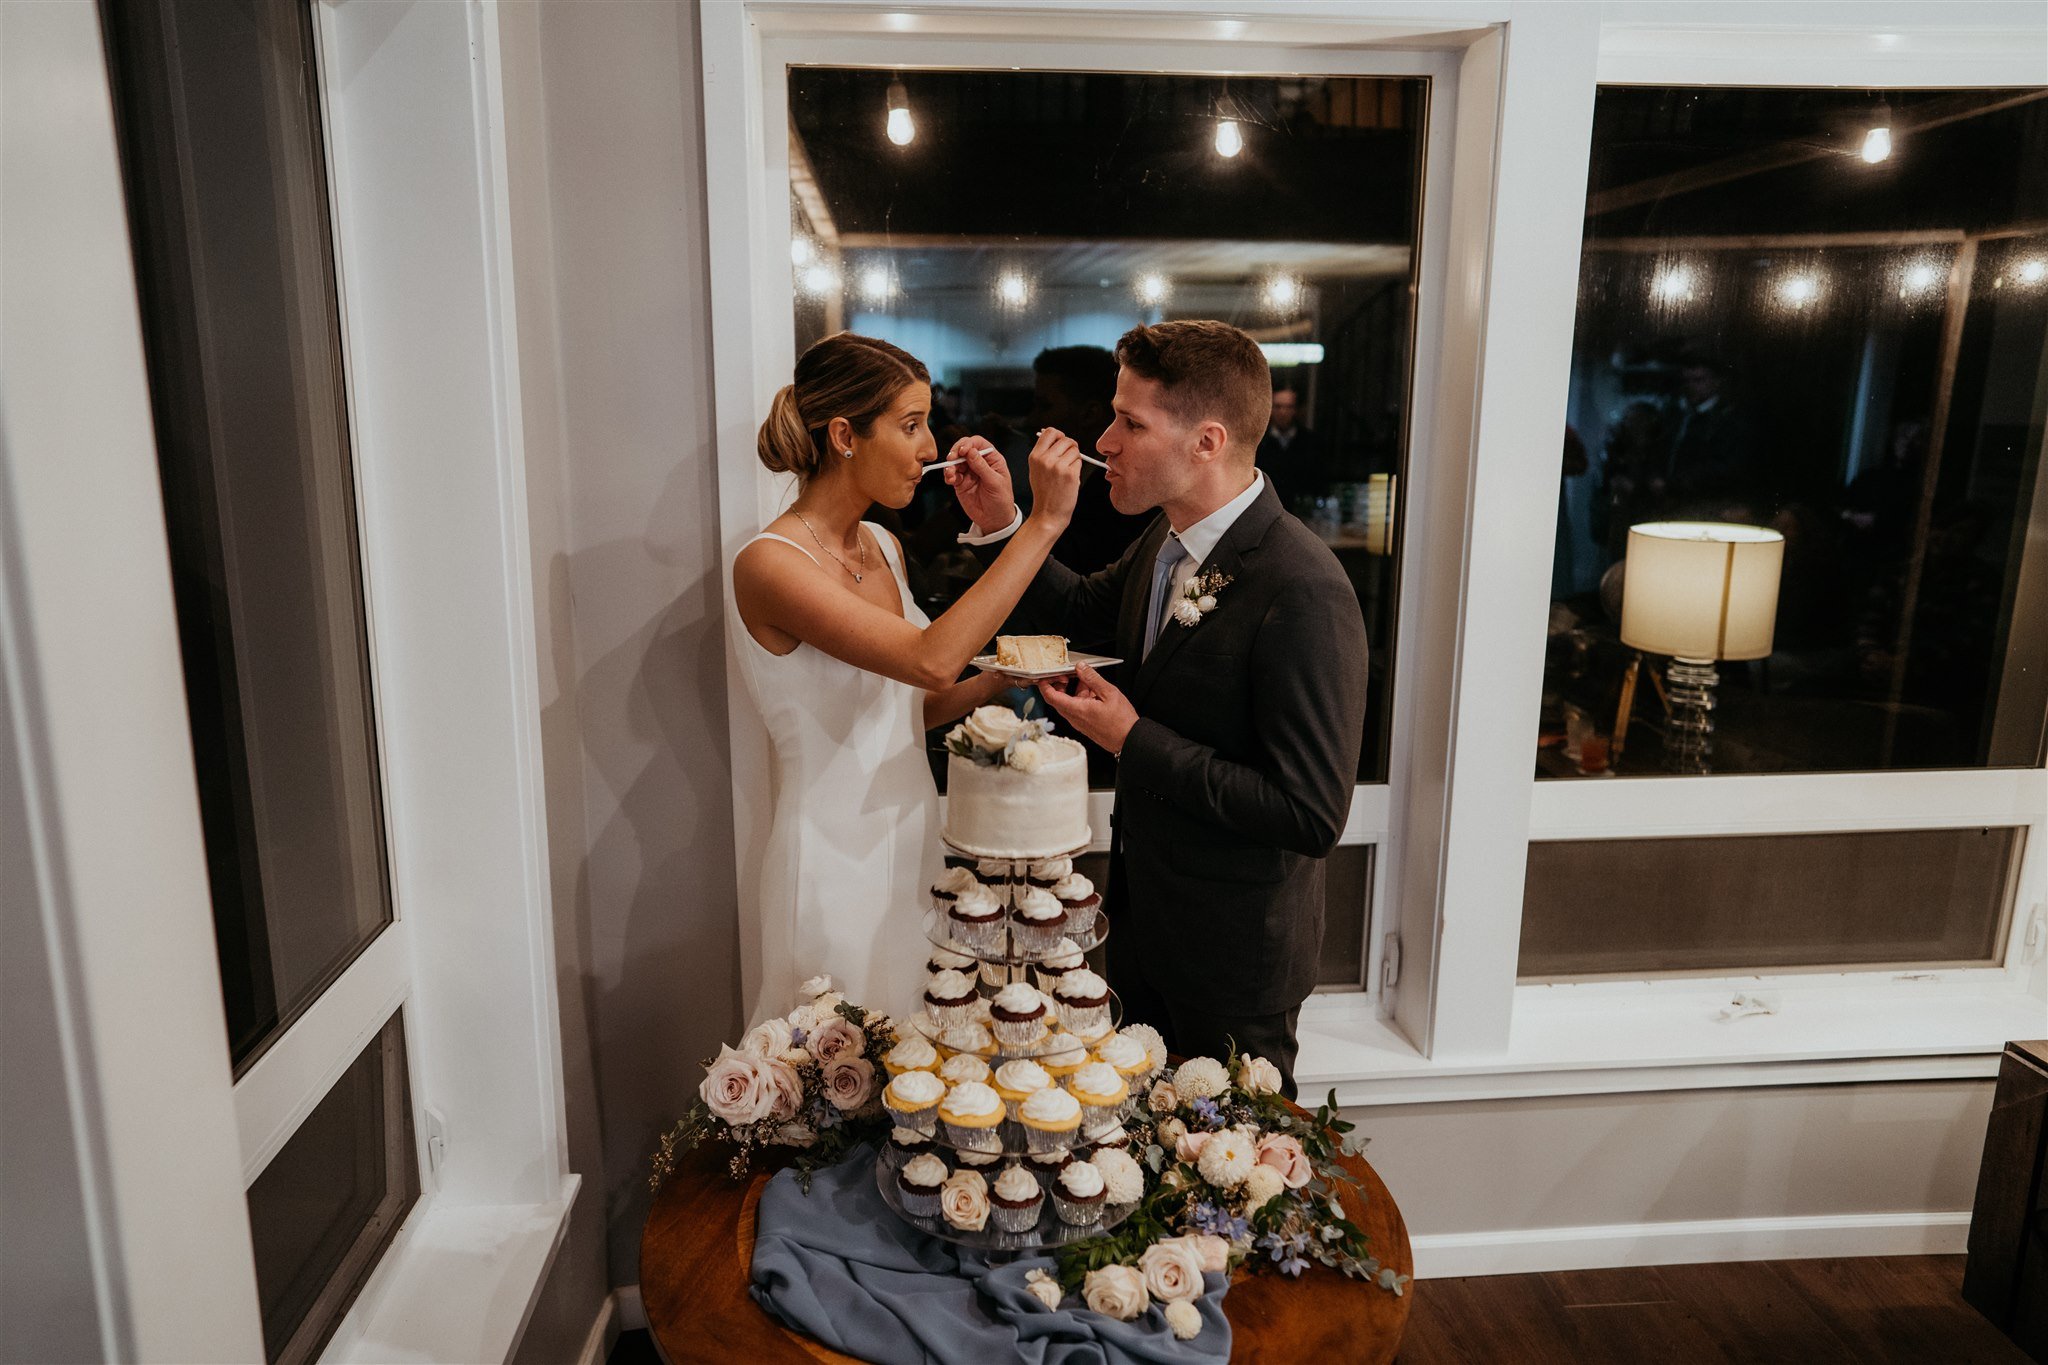 Bride and groom feeding each other cake at intimate wedding reception